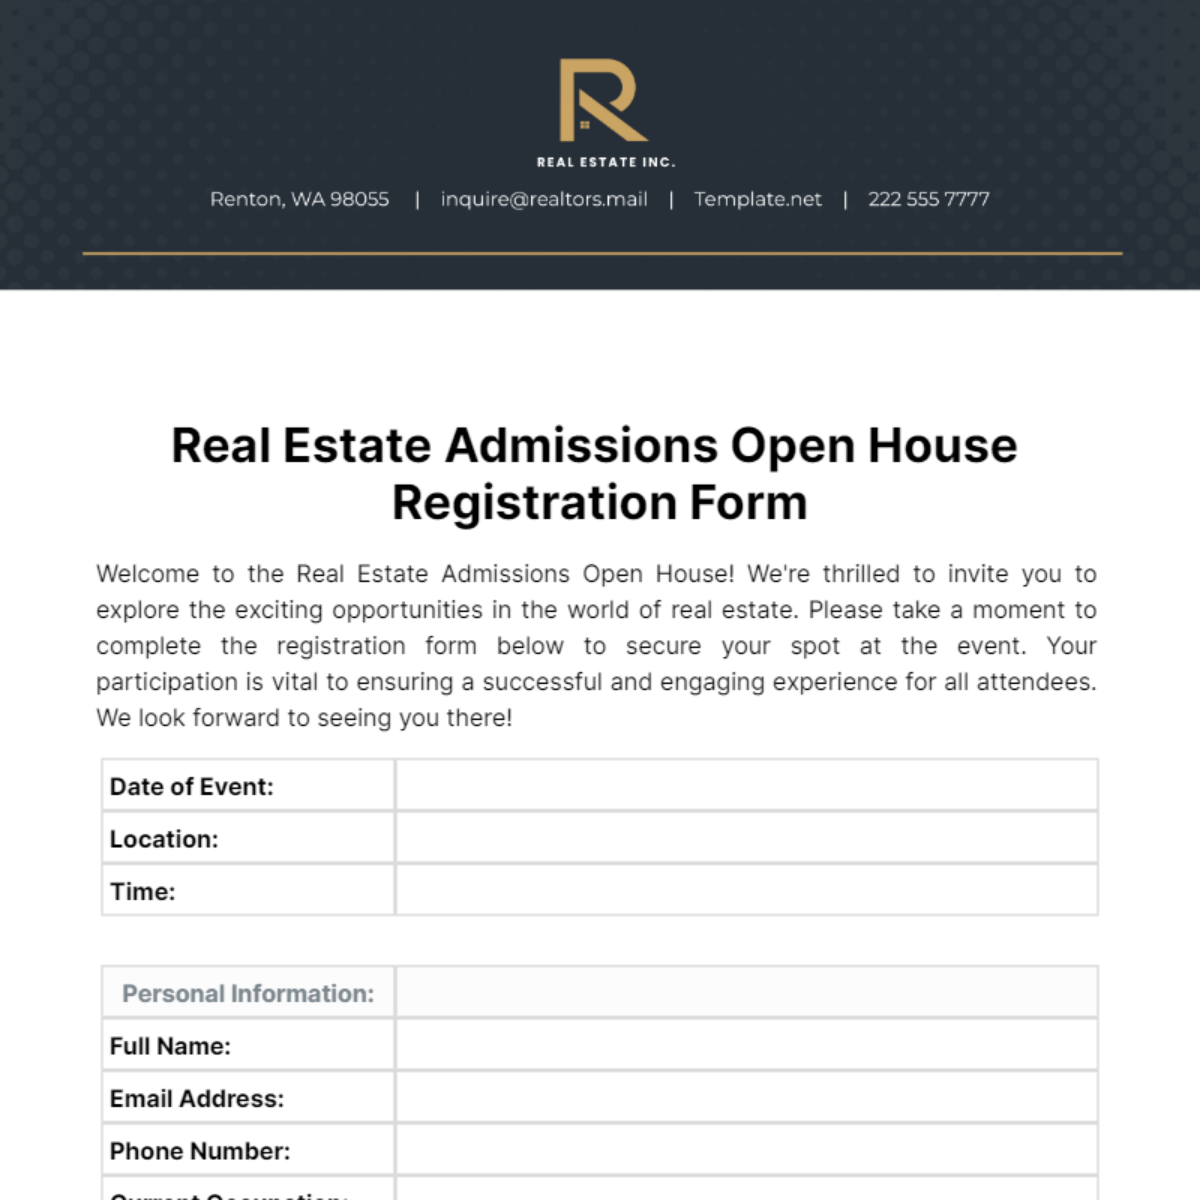 Real Estate Admissions Open House Registration Form Template